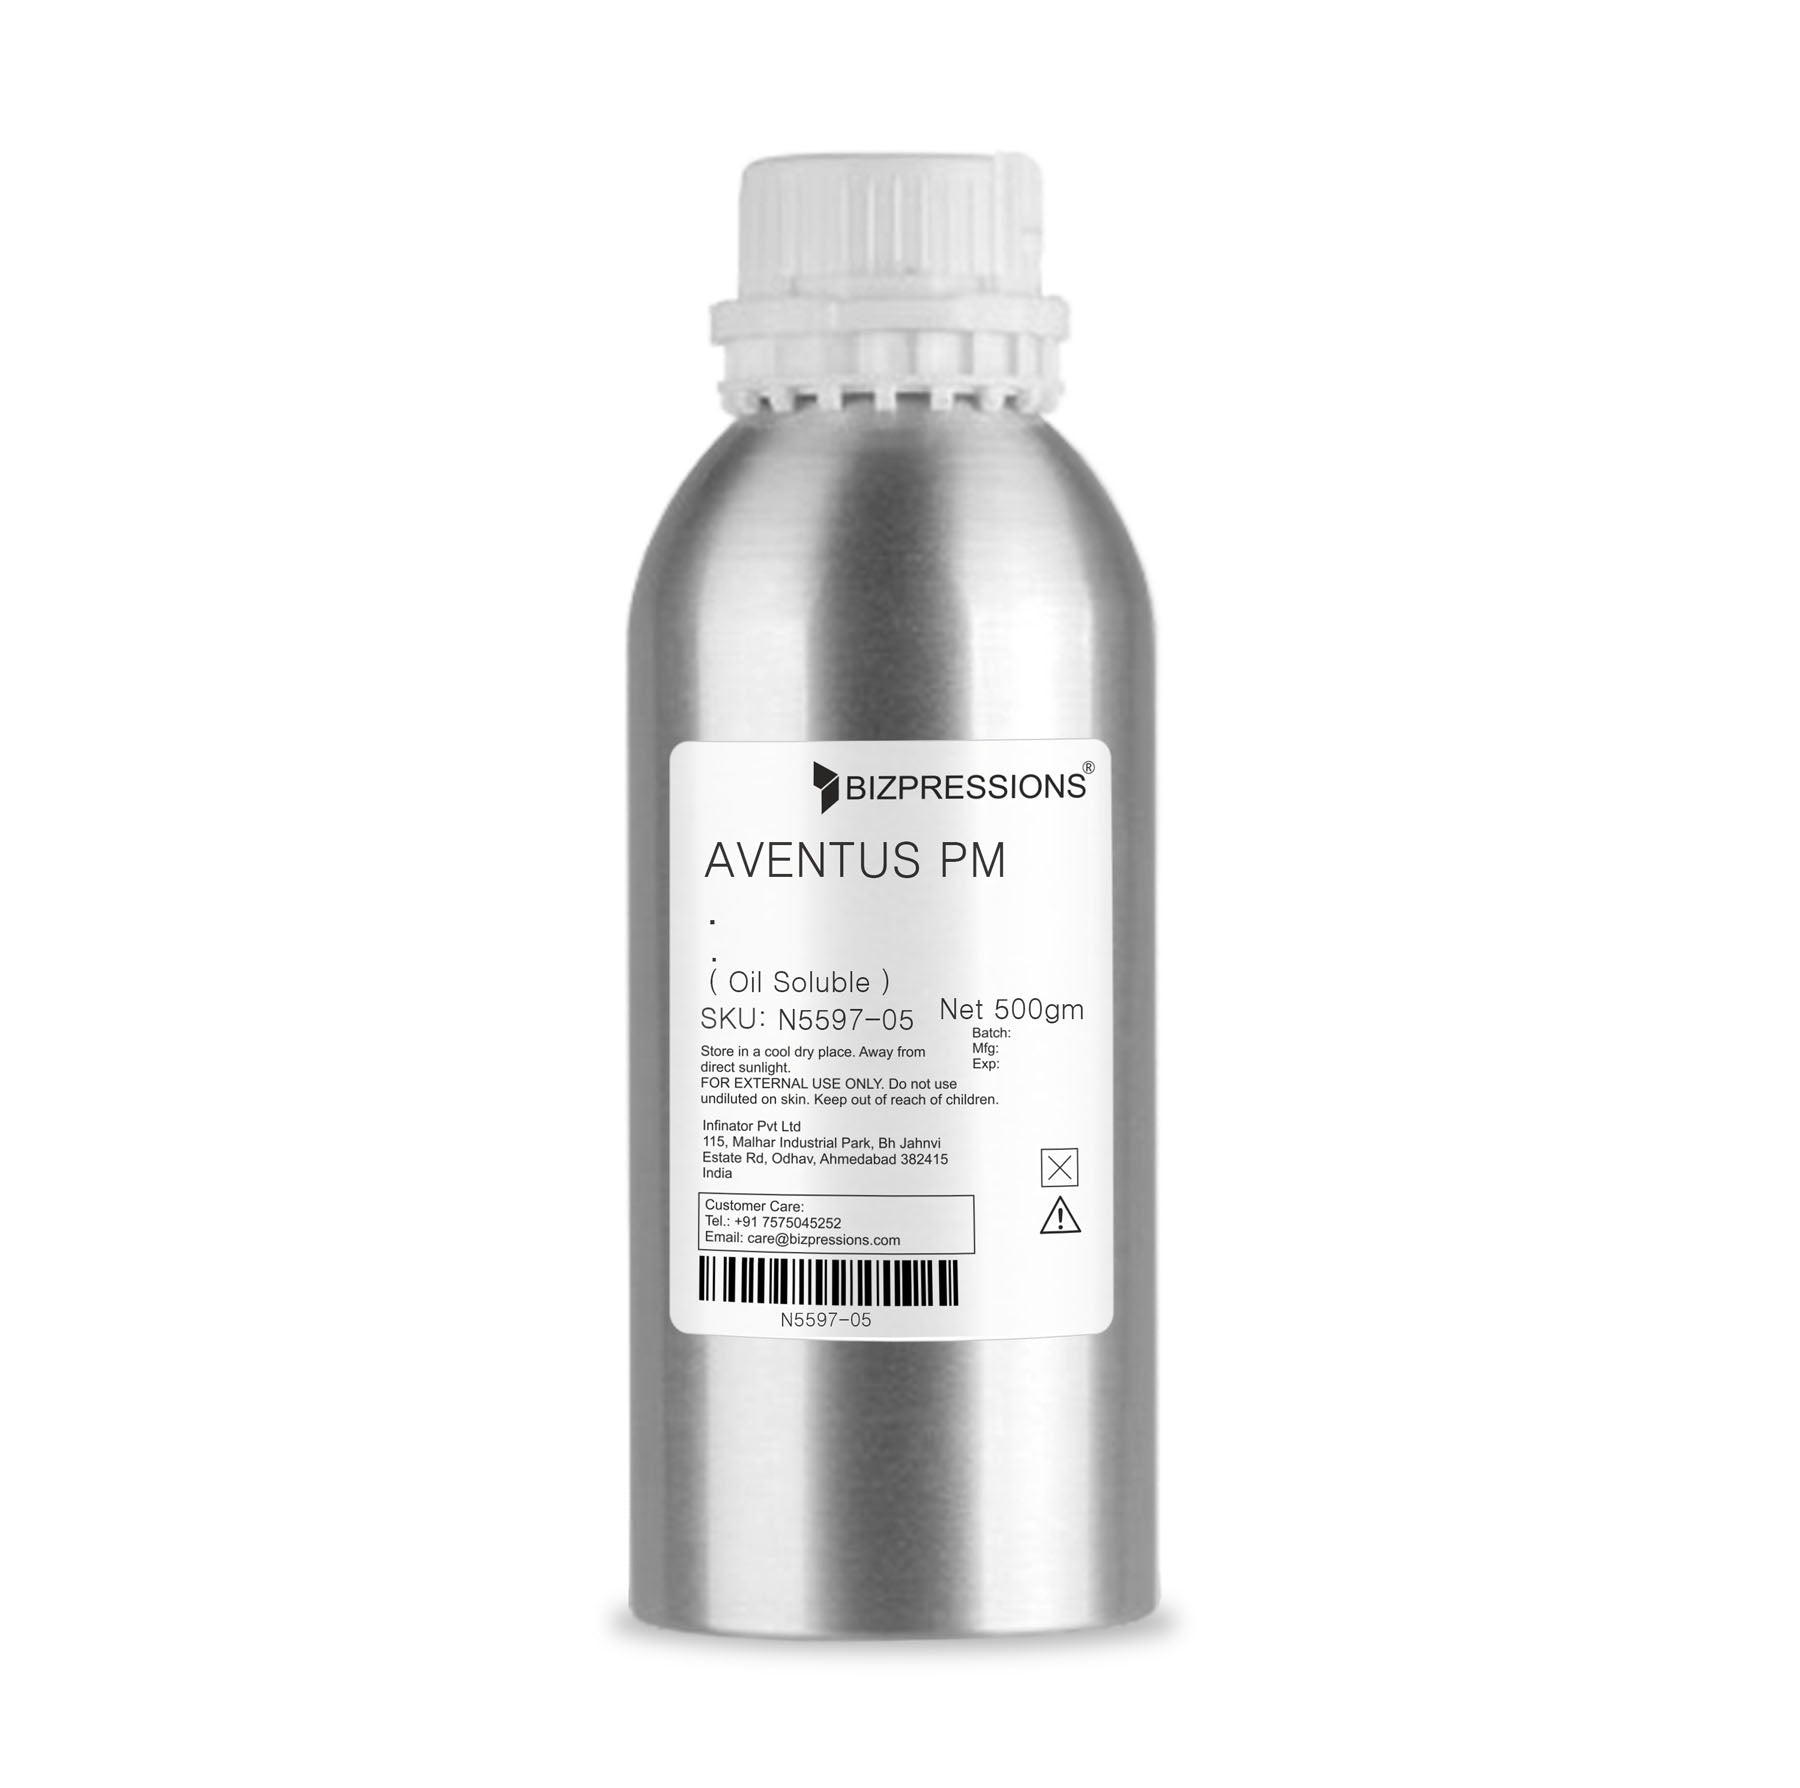 AVENTUS PM - Fragrance ( Oil Soluble ) - 500 gm